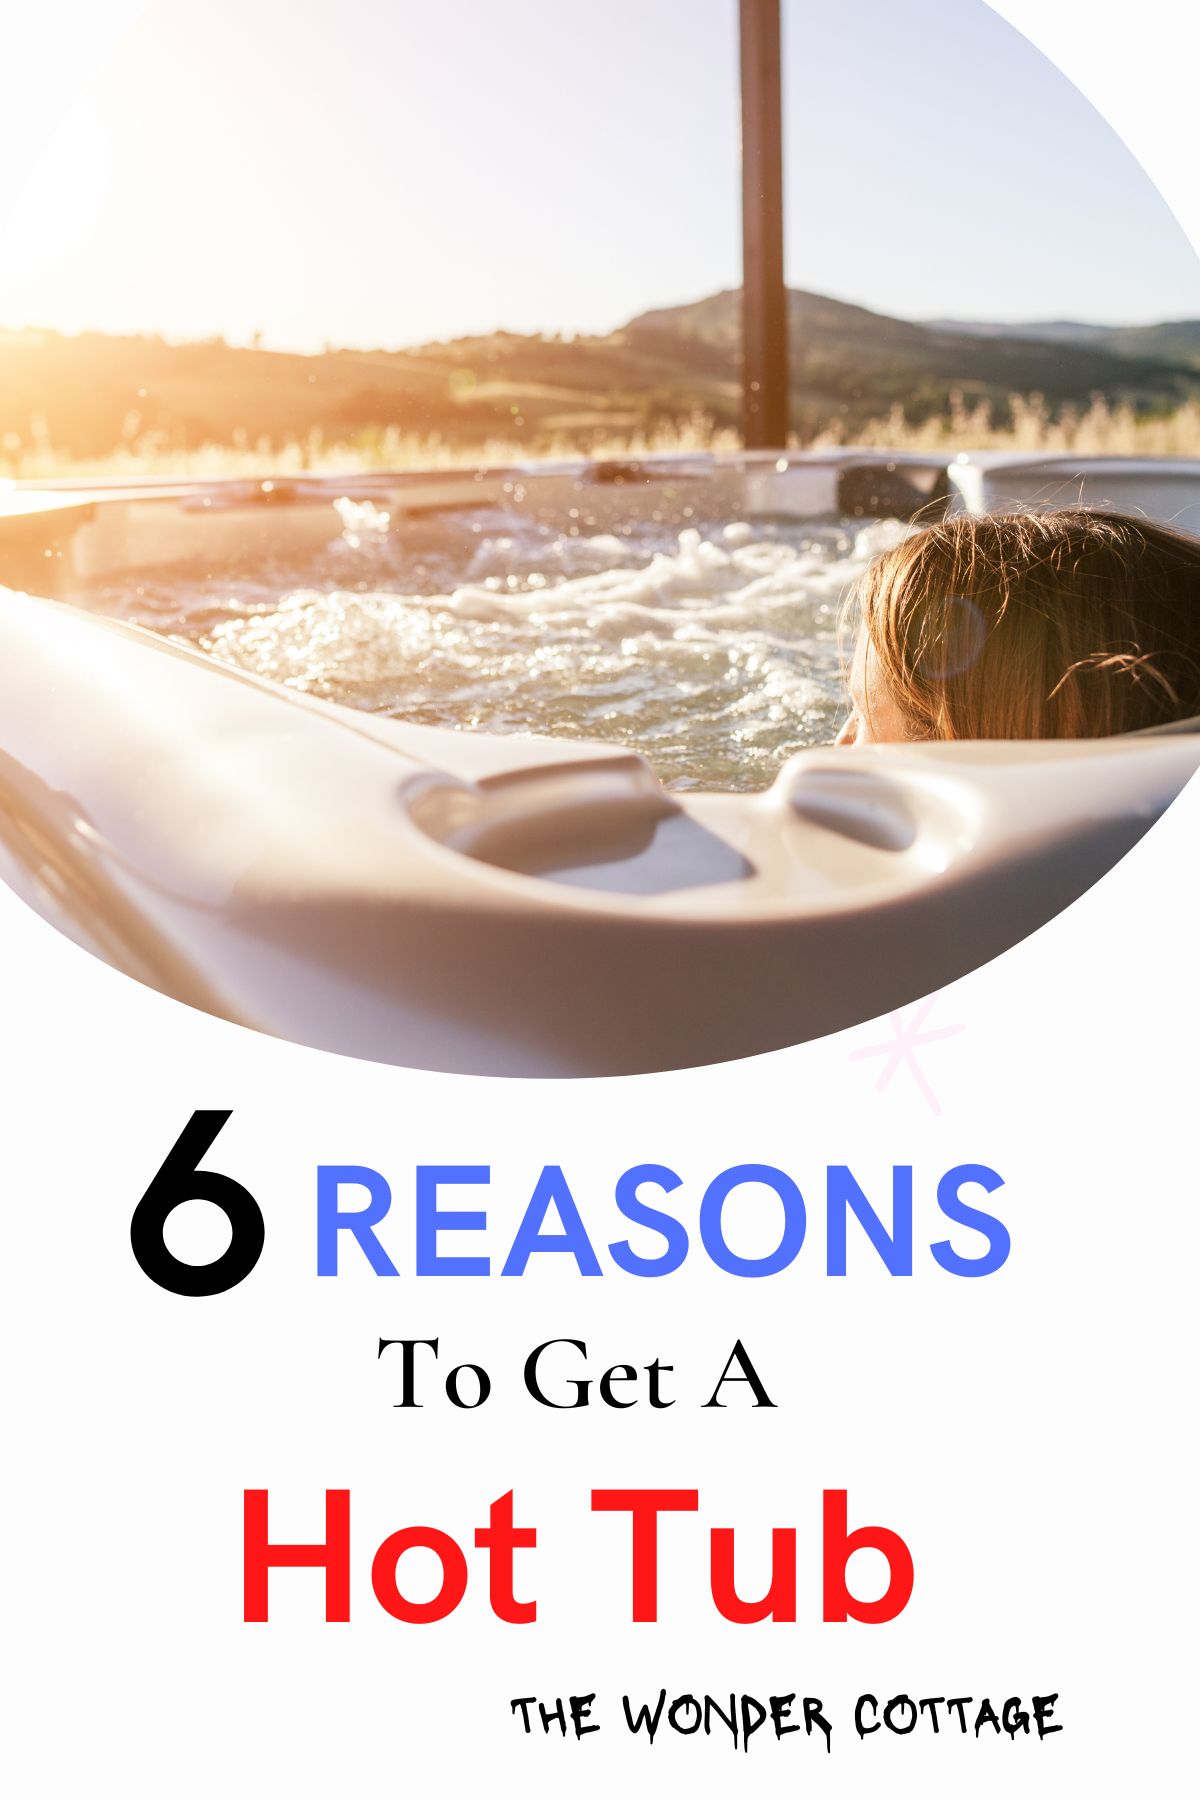 6 Reasons to Get a Hot Tub